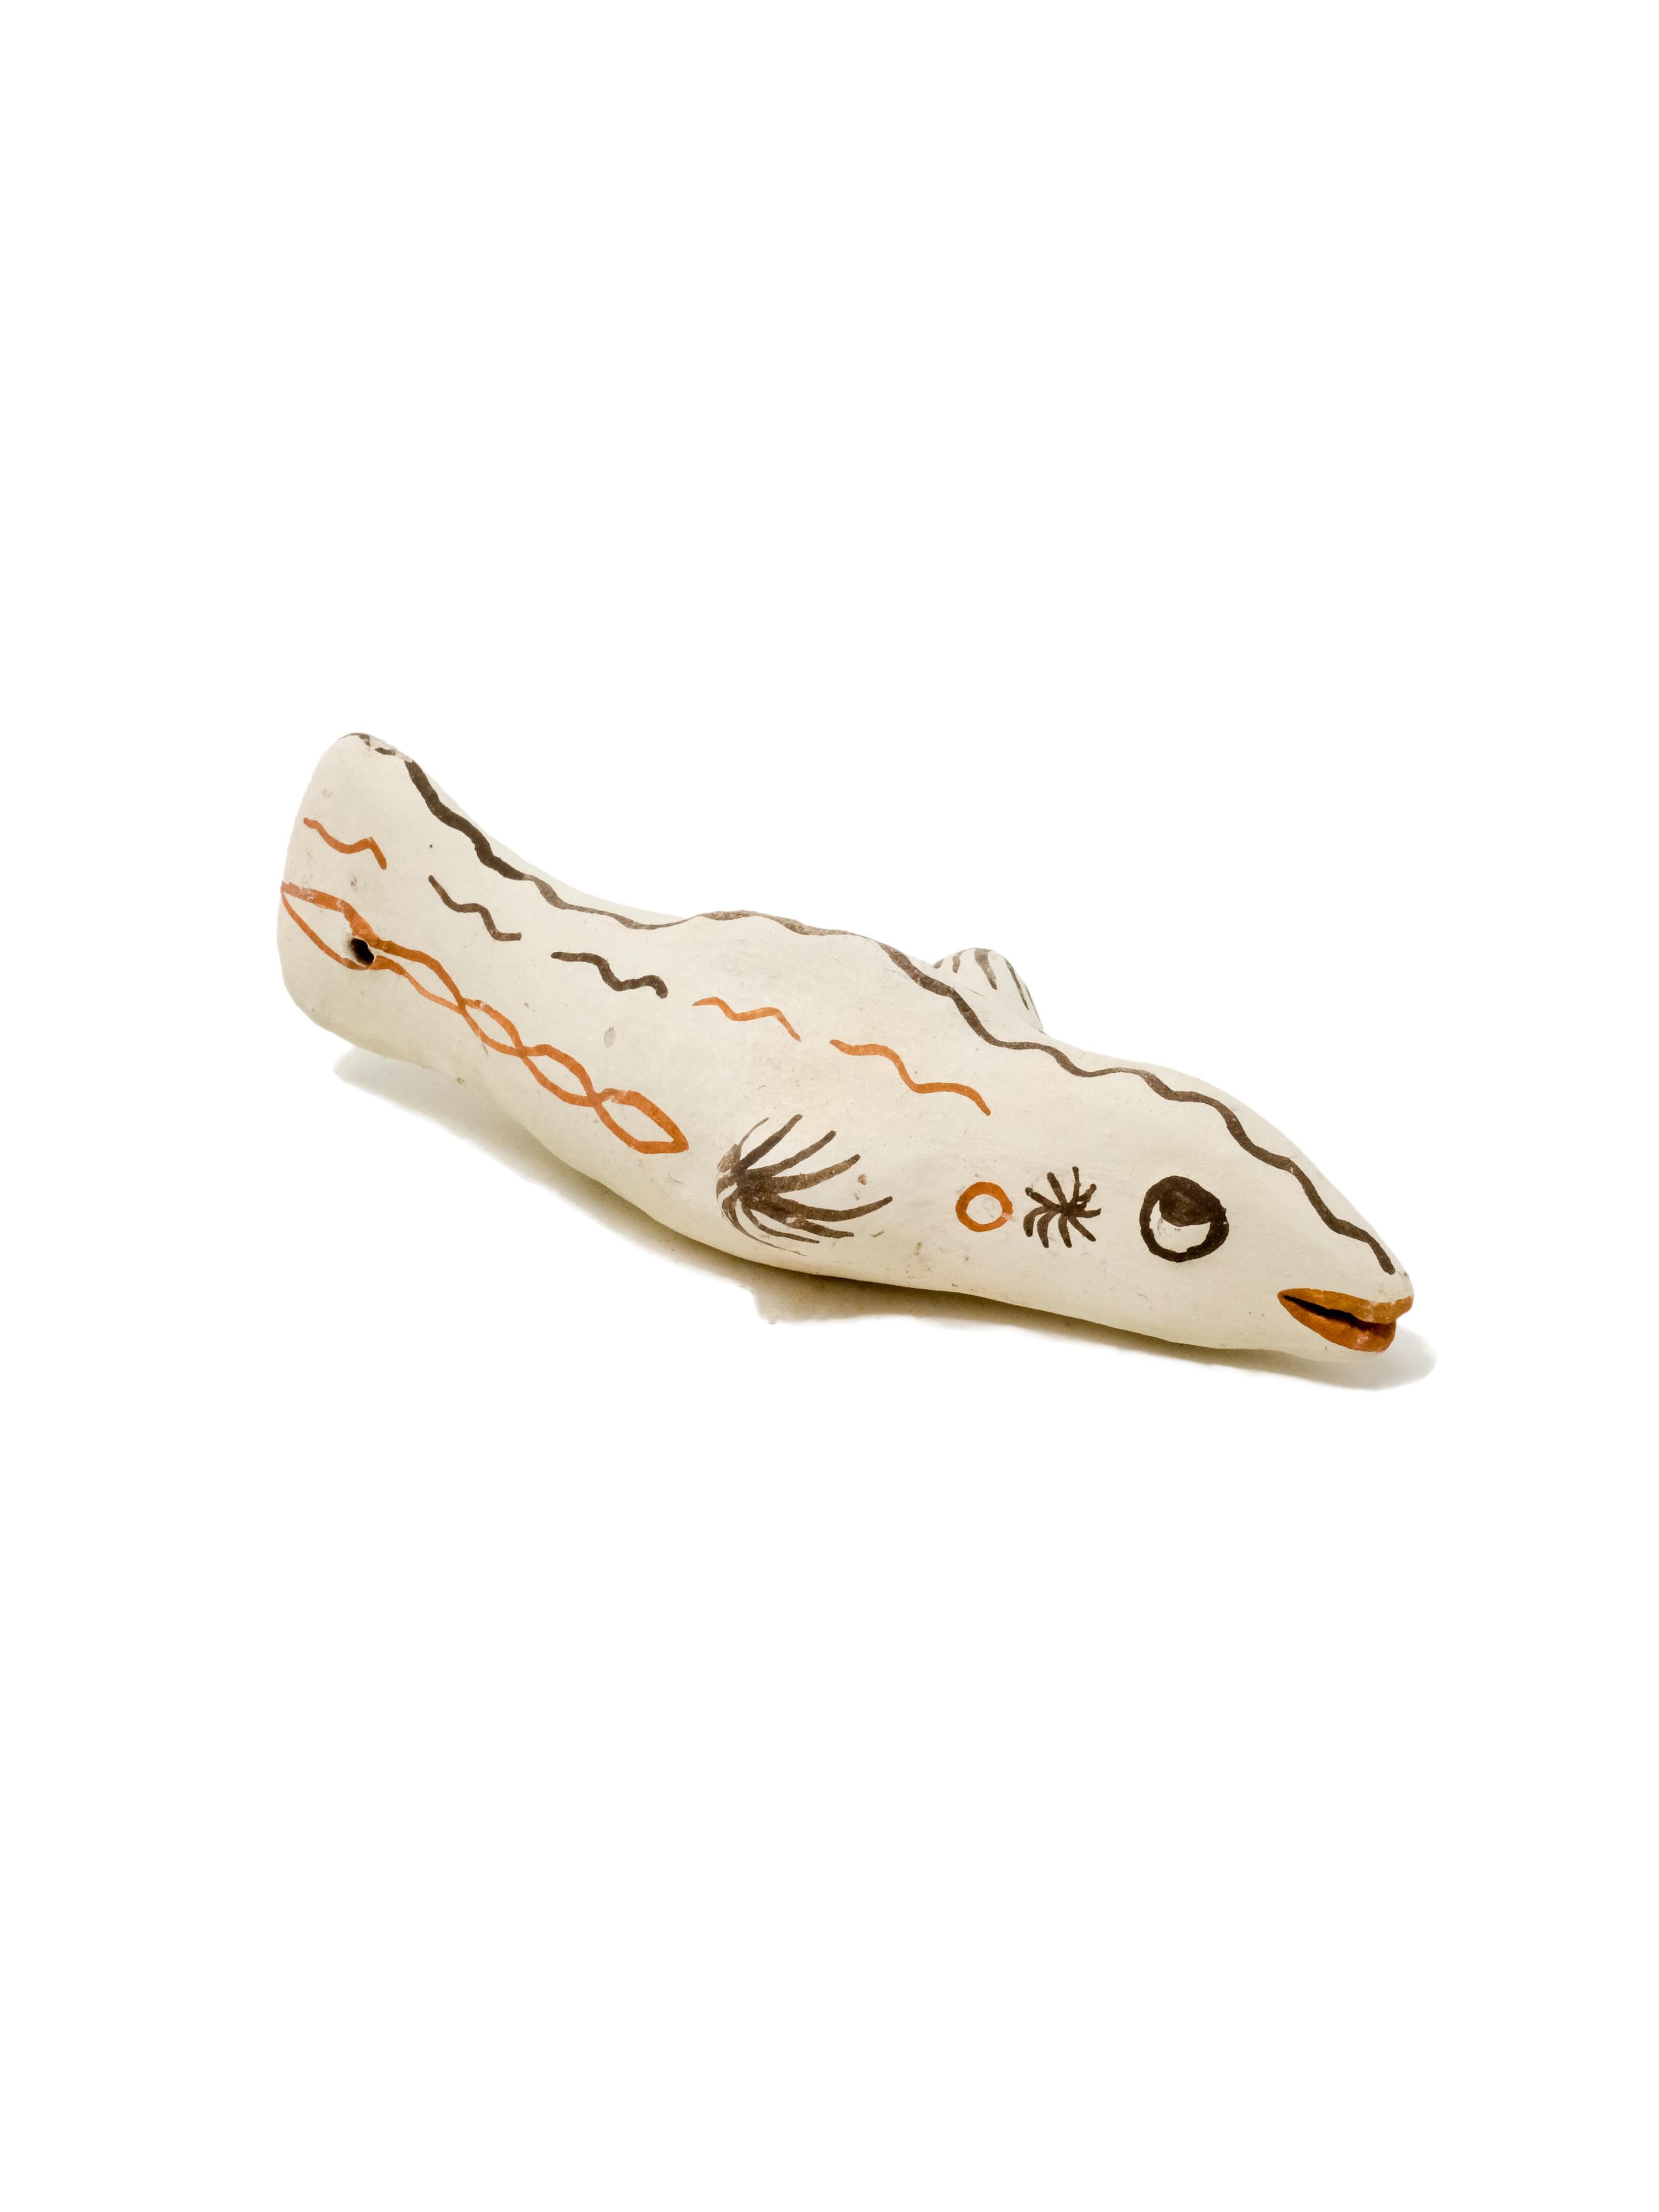 - Hand built decorative fish sculpture
- made of clay collected from the potter's surroundings.
- decorative motifs painted with a goat hair brush made by the potter to apply natural pigments.
- made in the Moroccan Rif mountains by